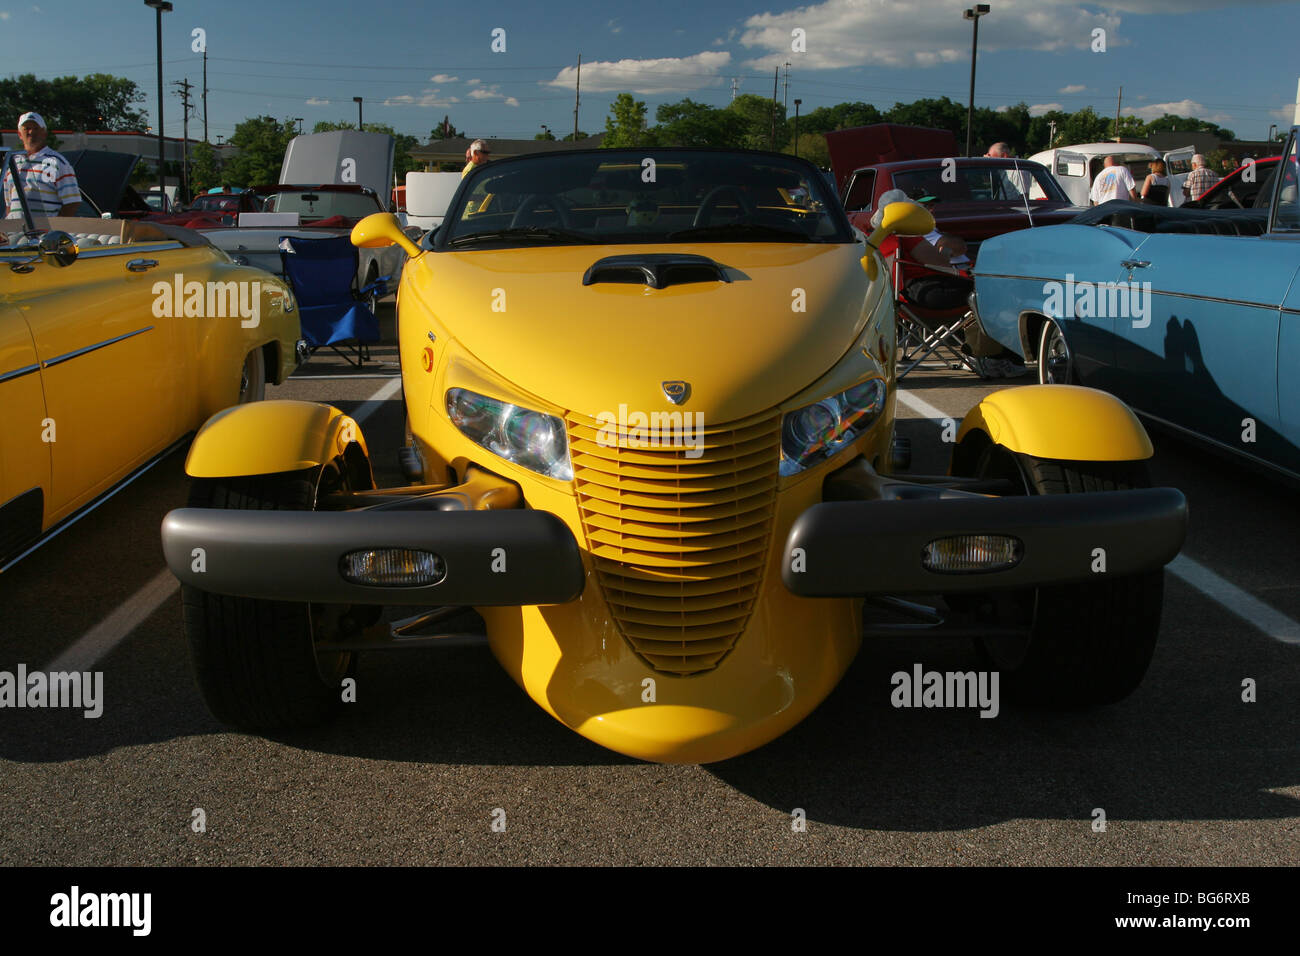 Auto- Plymouth Prowler. At cruise night car show. Stock Photo